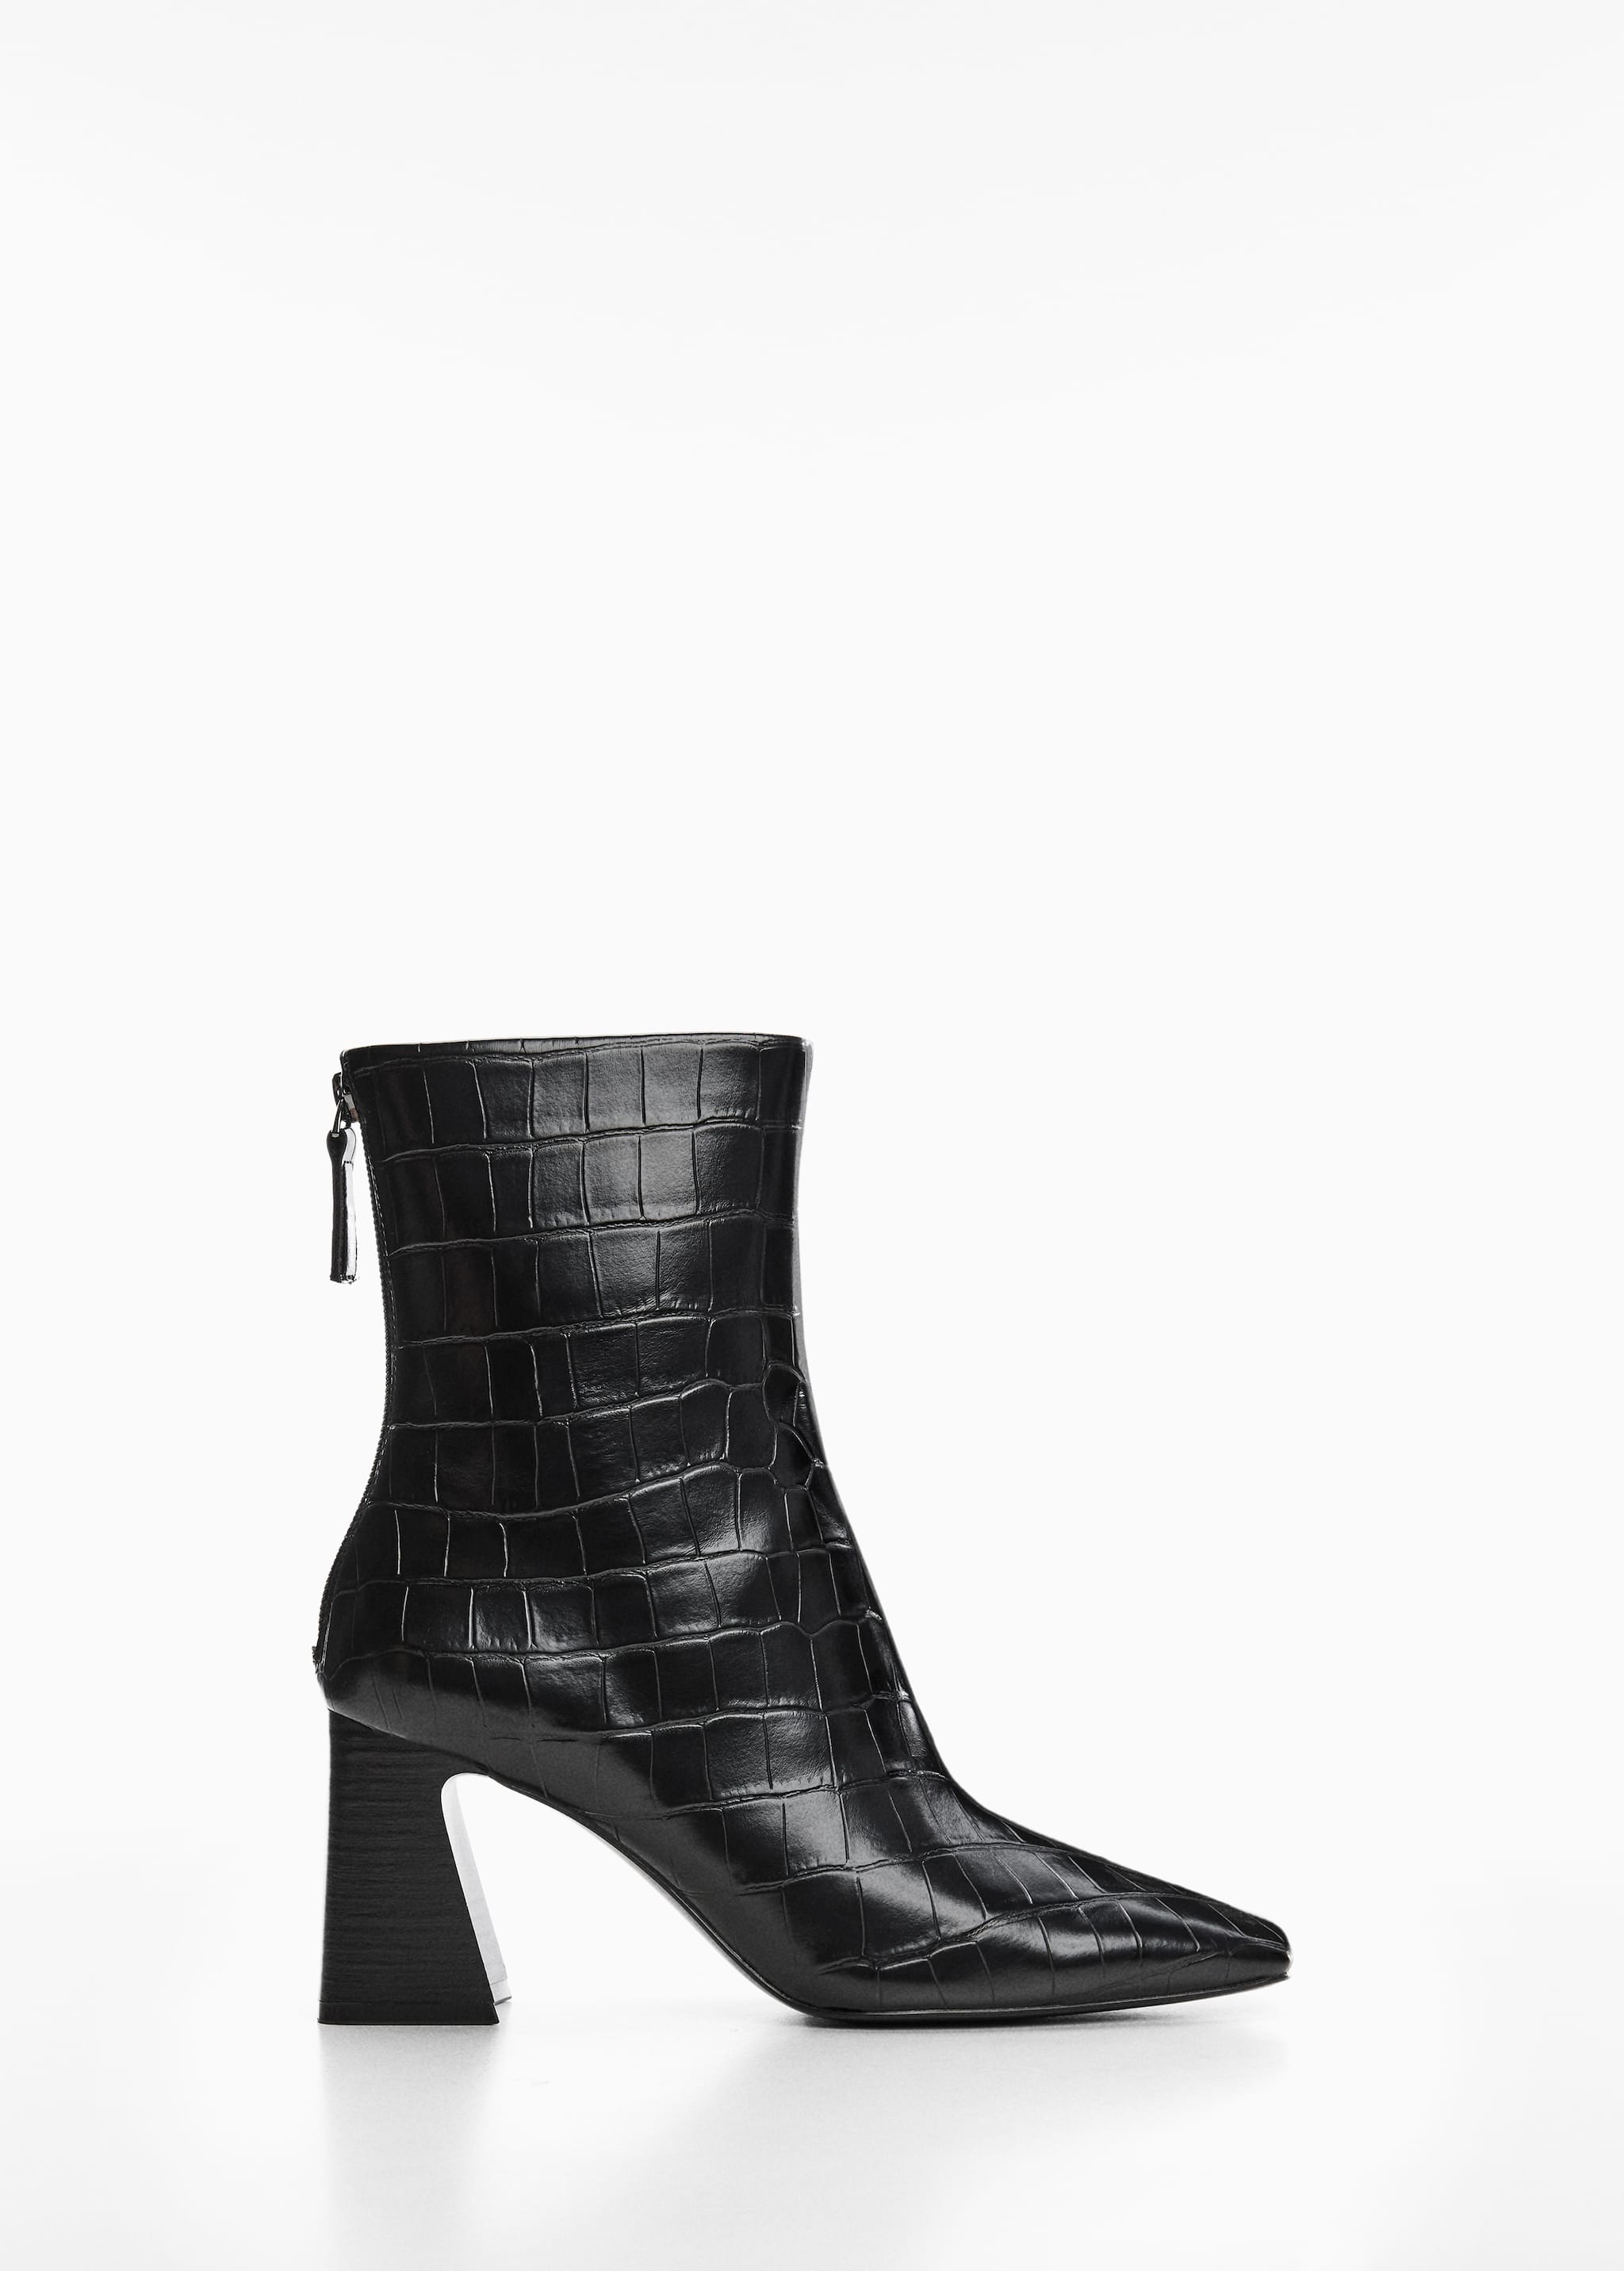 Croc-effect ankle boots - Article without model